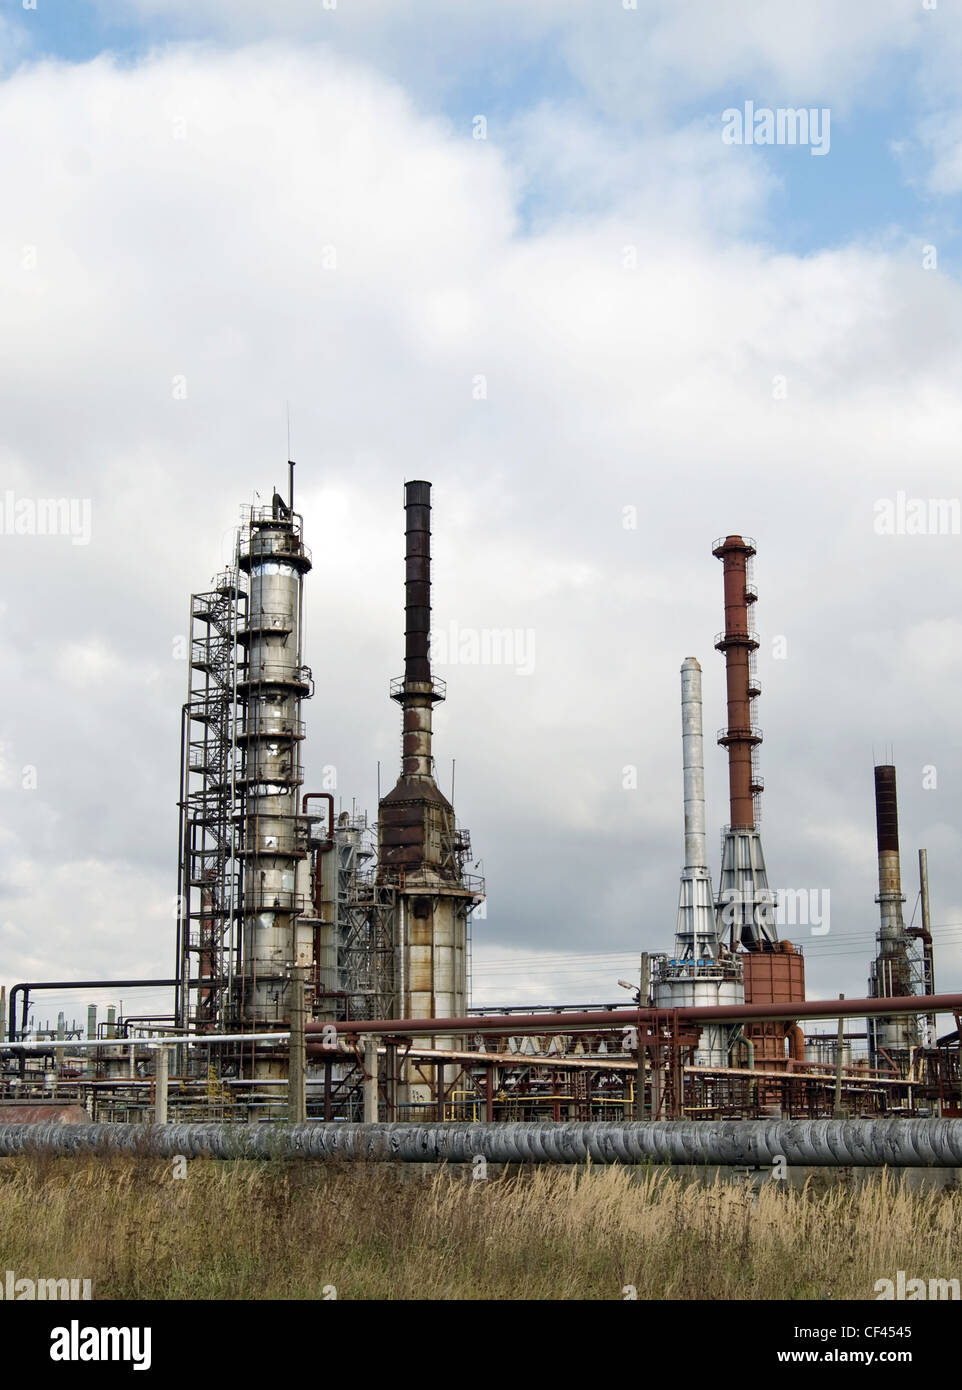 oil refinery against a blue sky Stock Photo